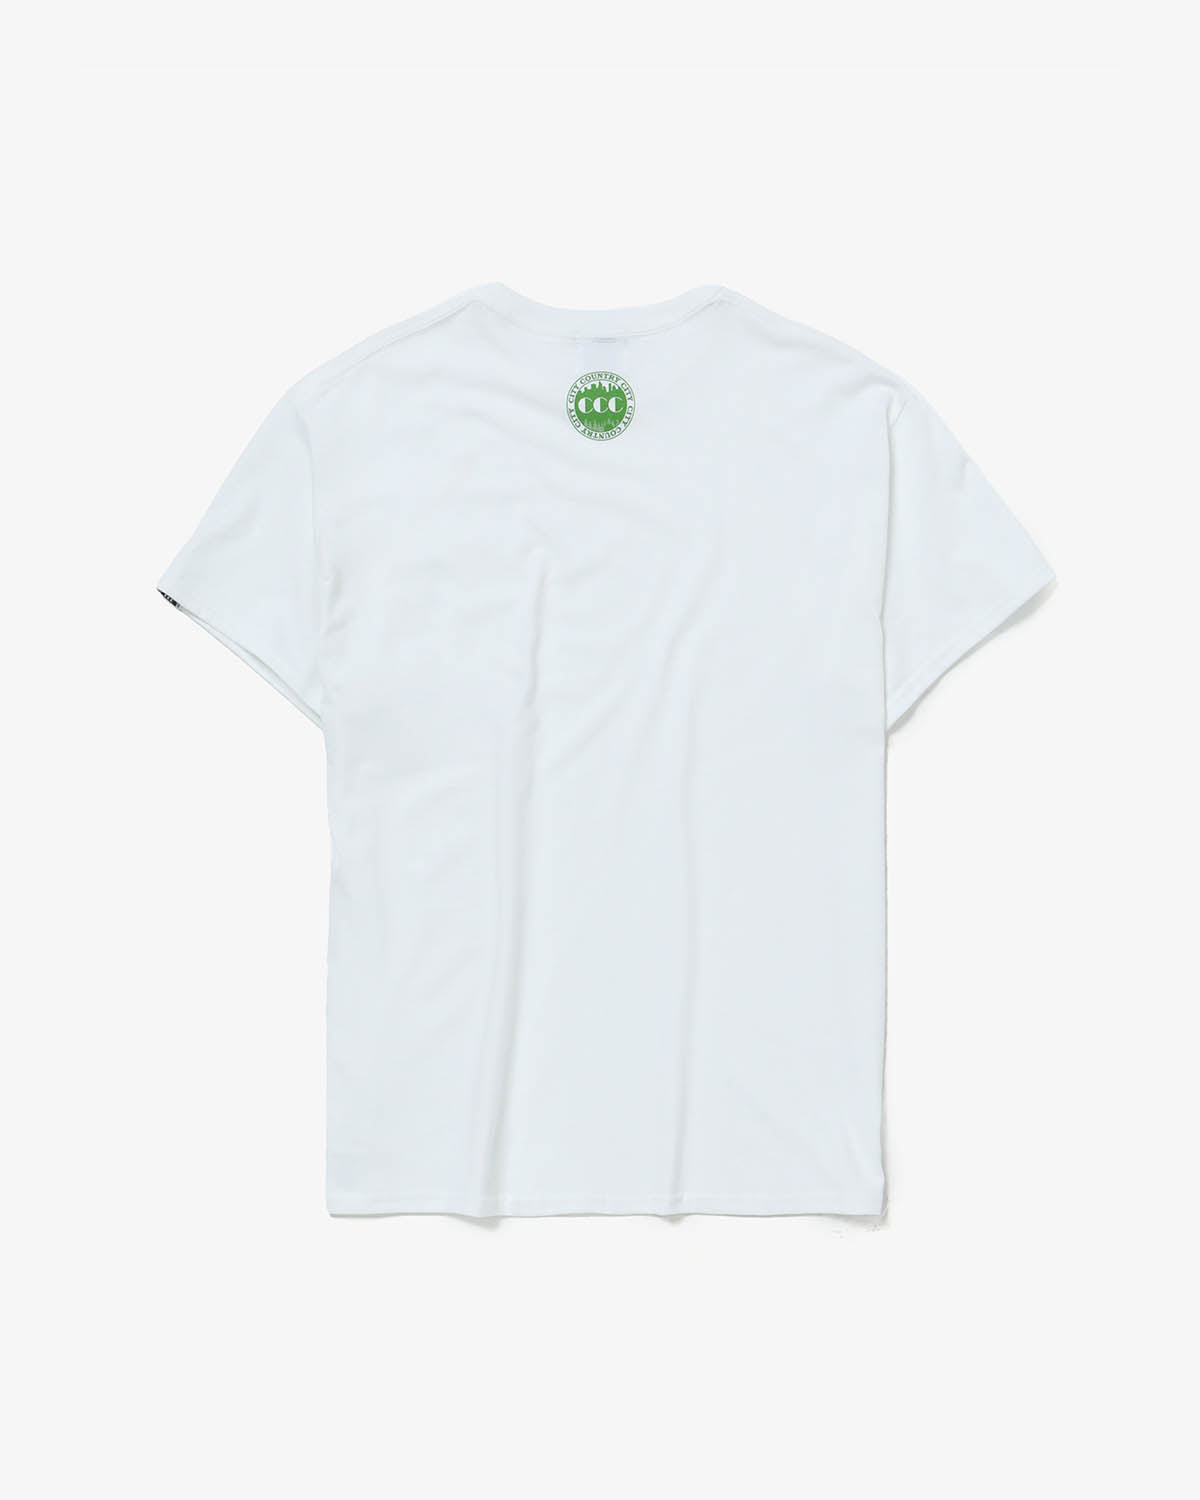 EMBROIDED LOGO POCKET TEE COTTON JERSEY by CITY COUNTRY CITY